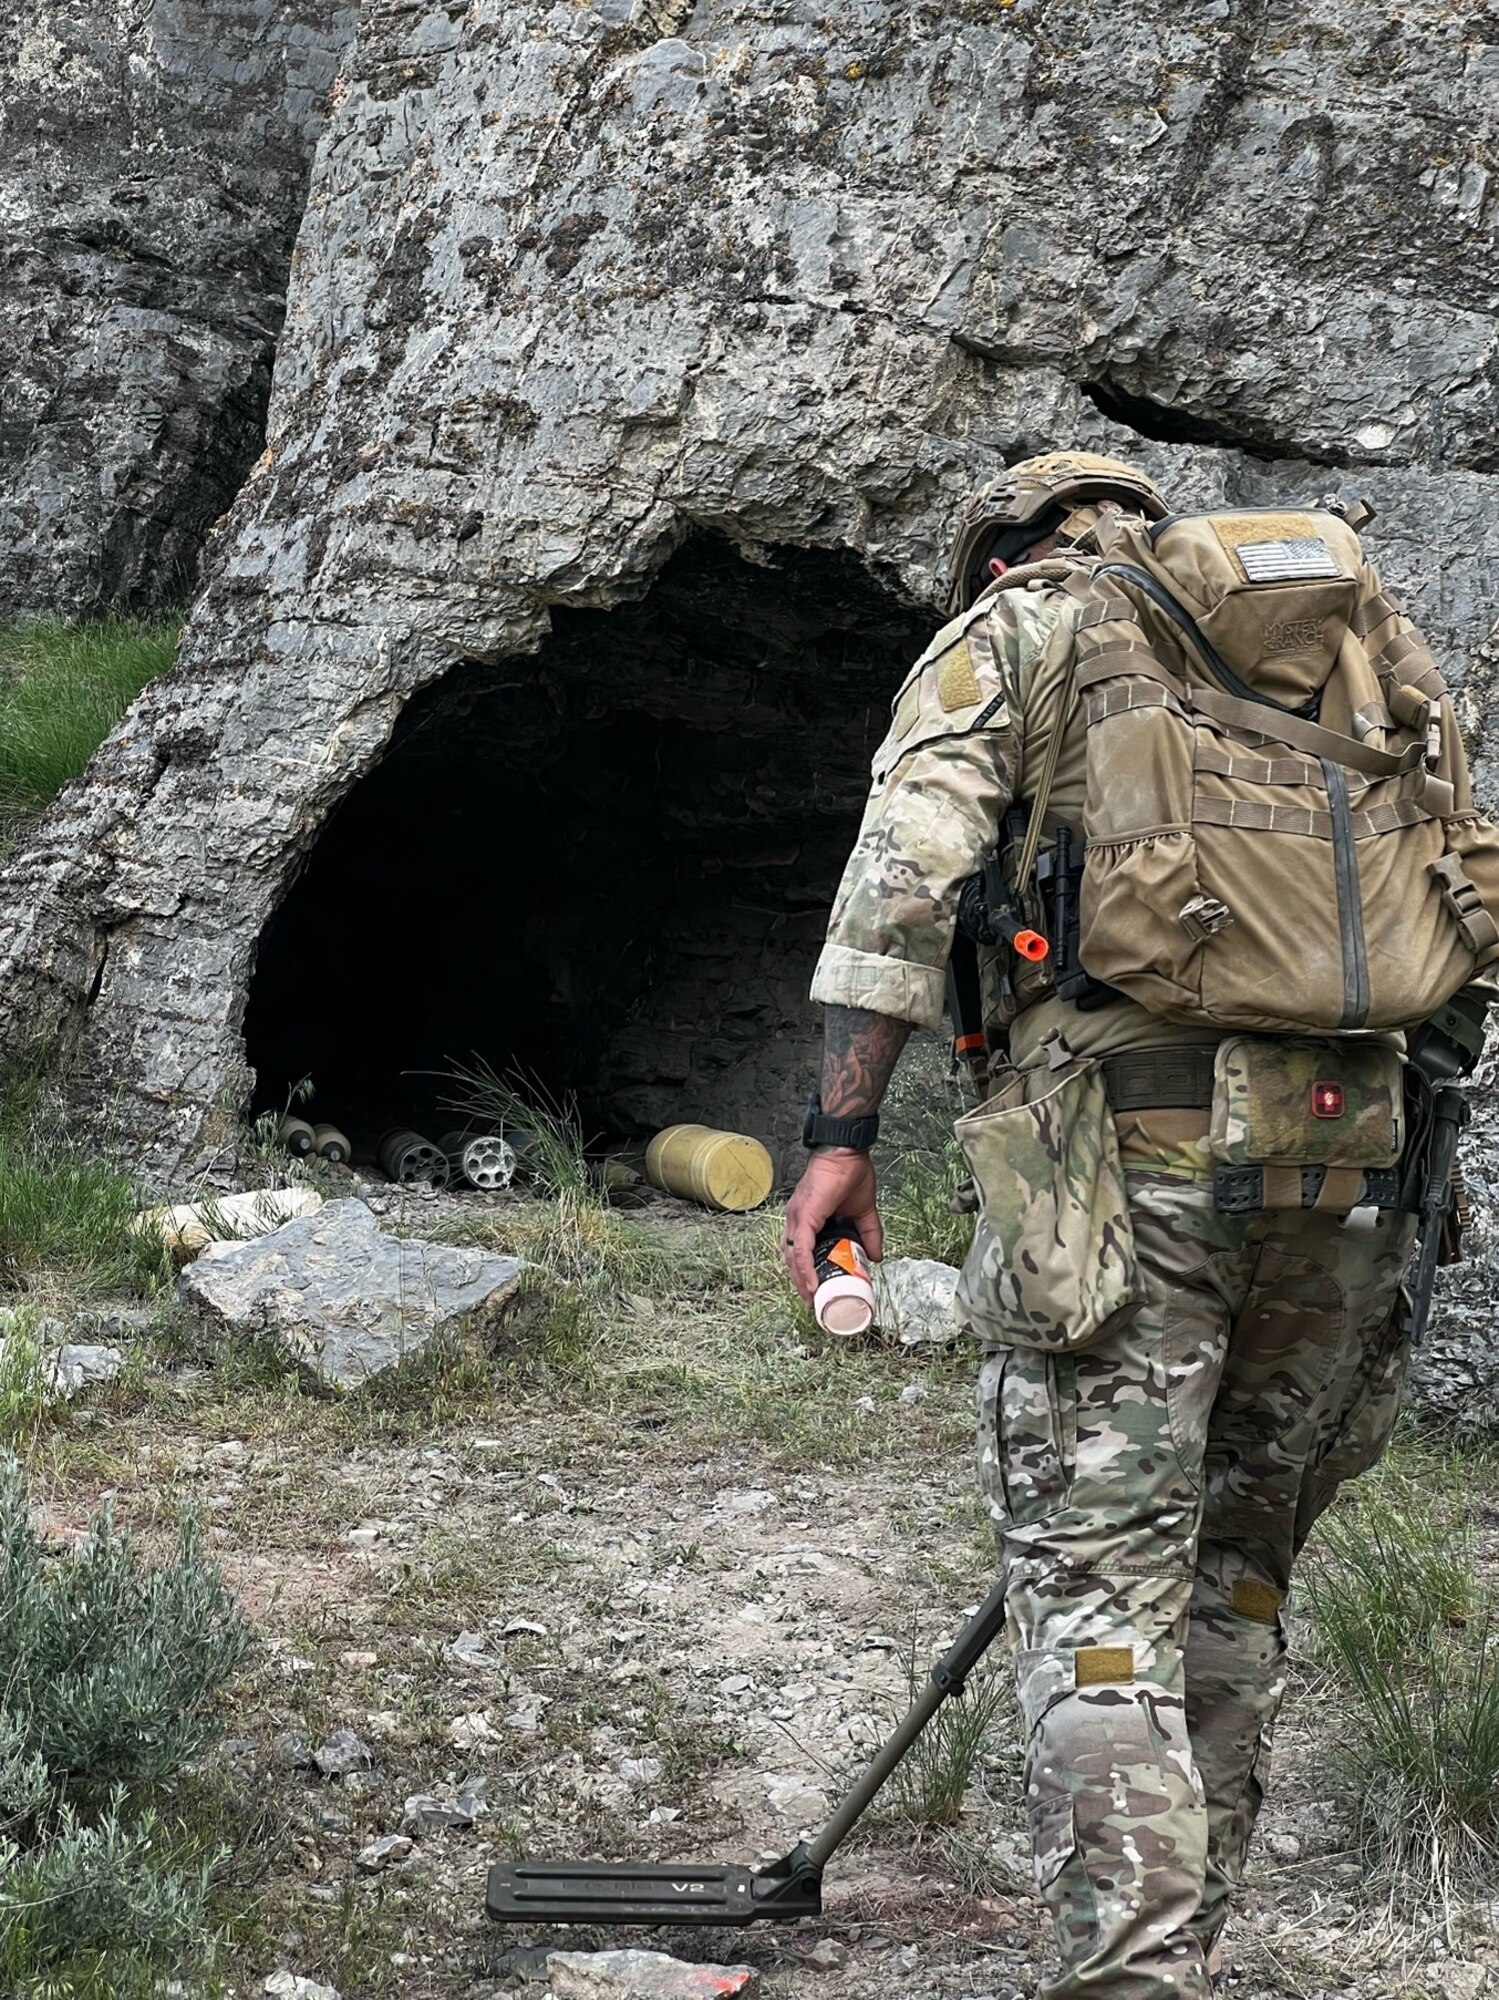 Staff Sgt. Austin Kener, EOD team leader from the 419th Civil Engineer Squadron, clears a route to a weapons cache during an exercise with the 775th Civil Engineer Squadron. (U.S. Air Force photo by Staff Sgt. Benjamin Casko)